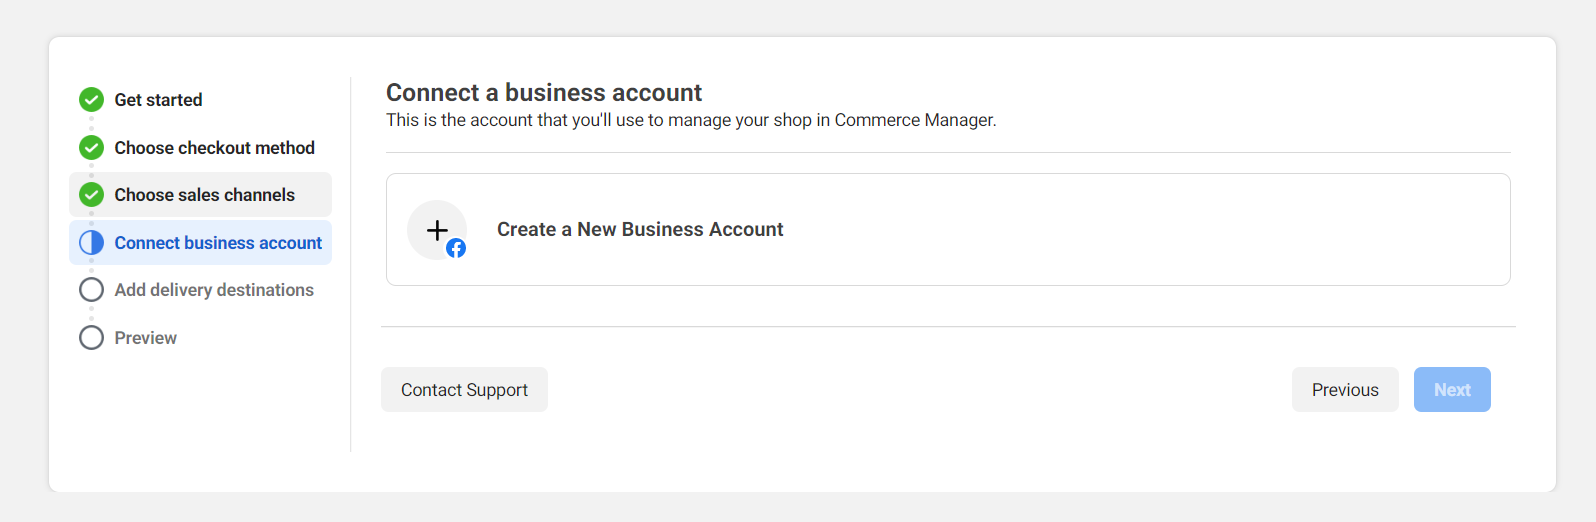 screenshot of the Connect Business Account menu in Meta Commerce Manager